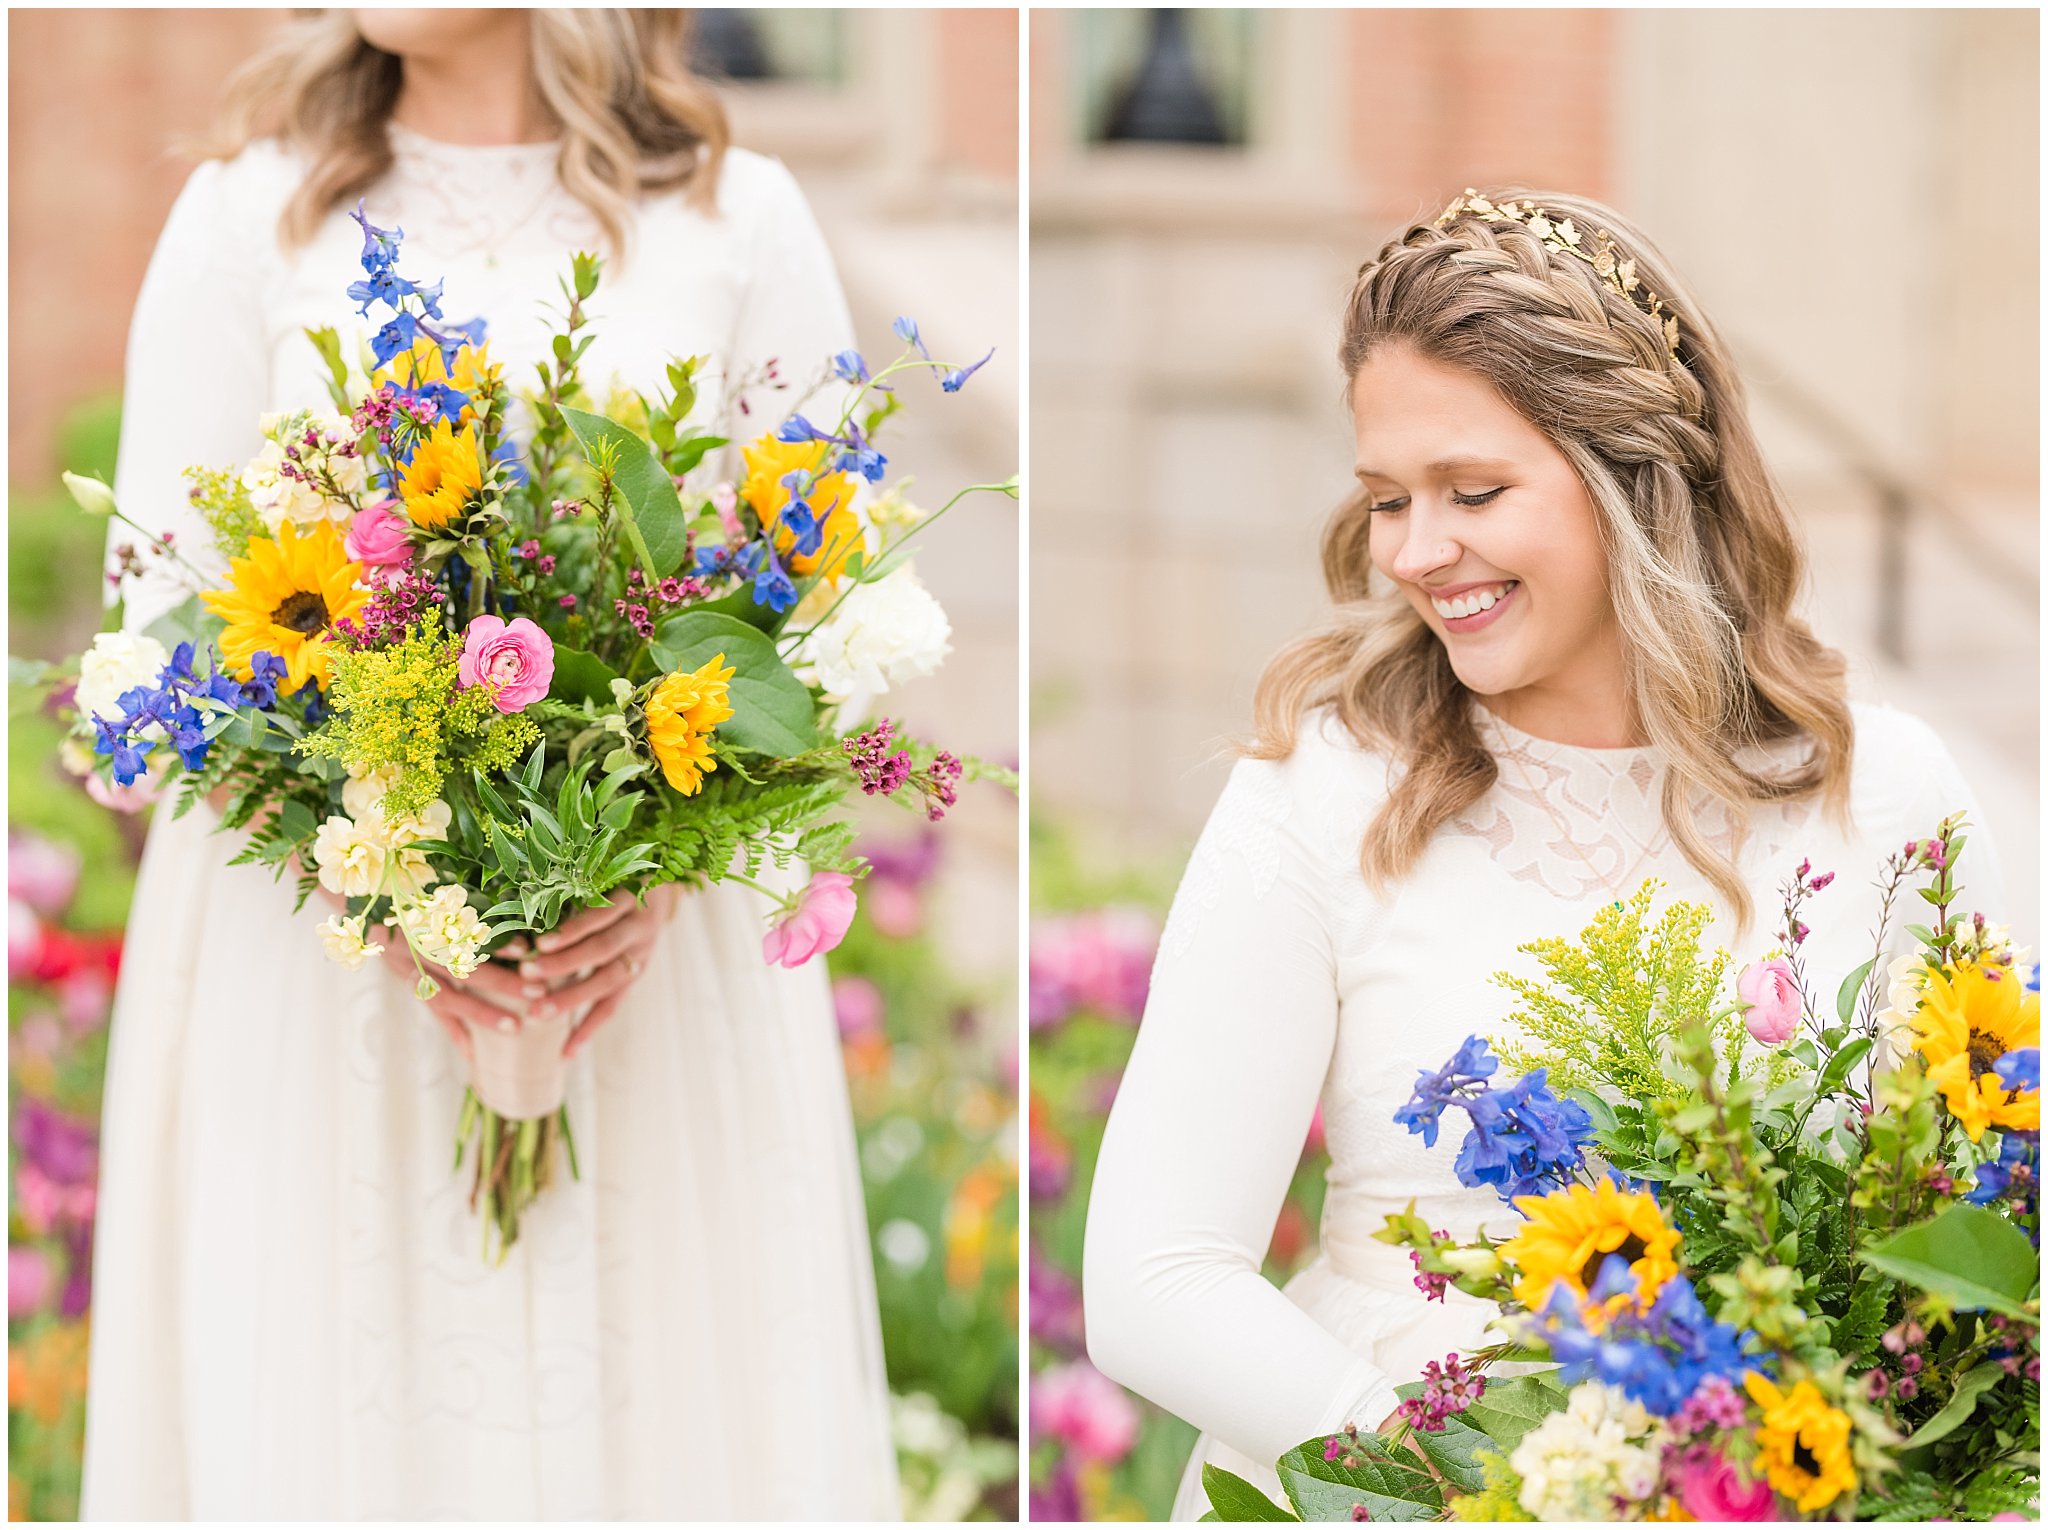 Bride wearing flowy dress with colorful bouquet for vintage inspired wedding attire | Emerald green, gold wedding colors | Provo City Center Temple Spring Formal Session | Jessie and Dallin Photography